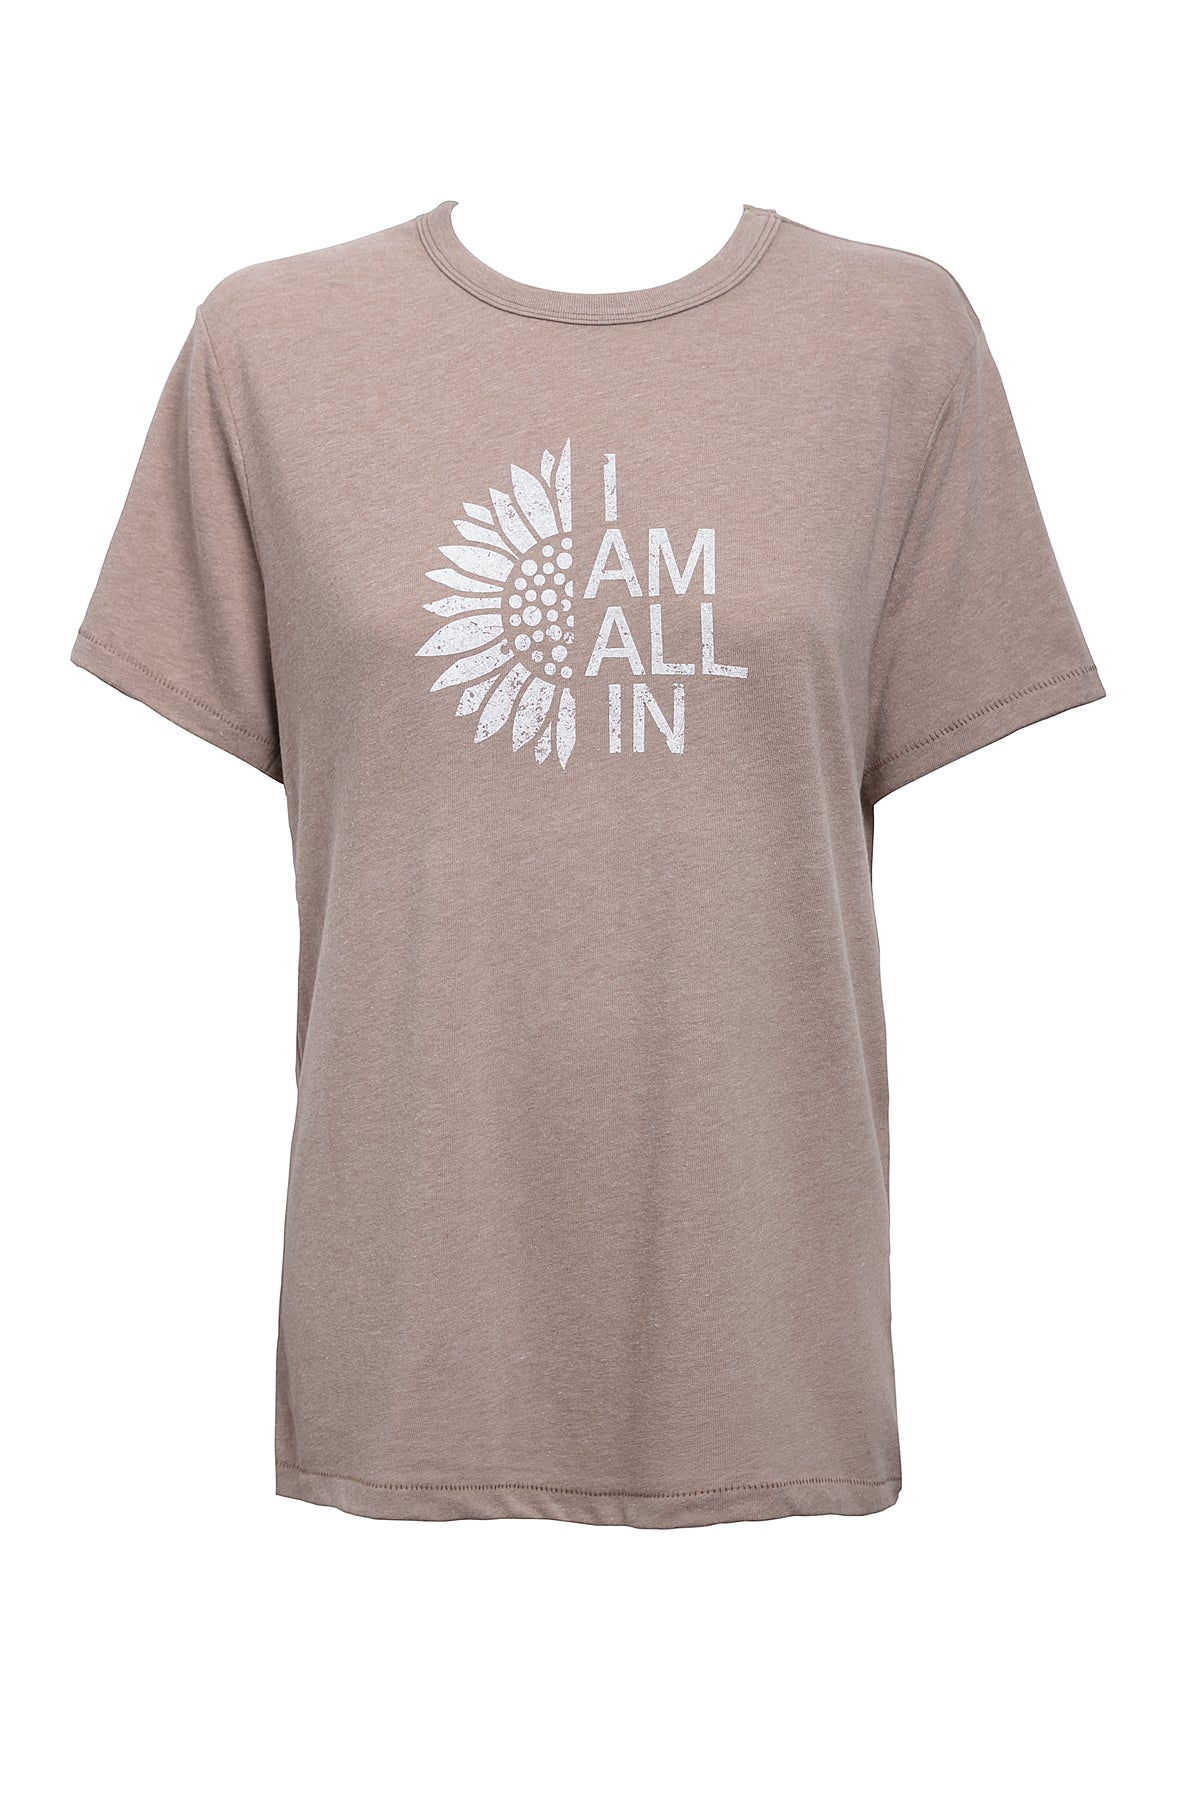 Vintage Tee Shirt "I am all in"